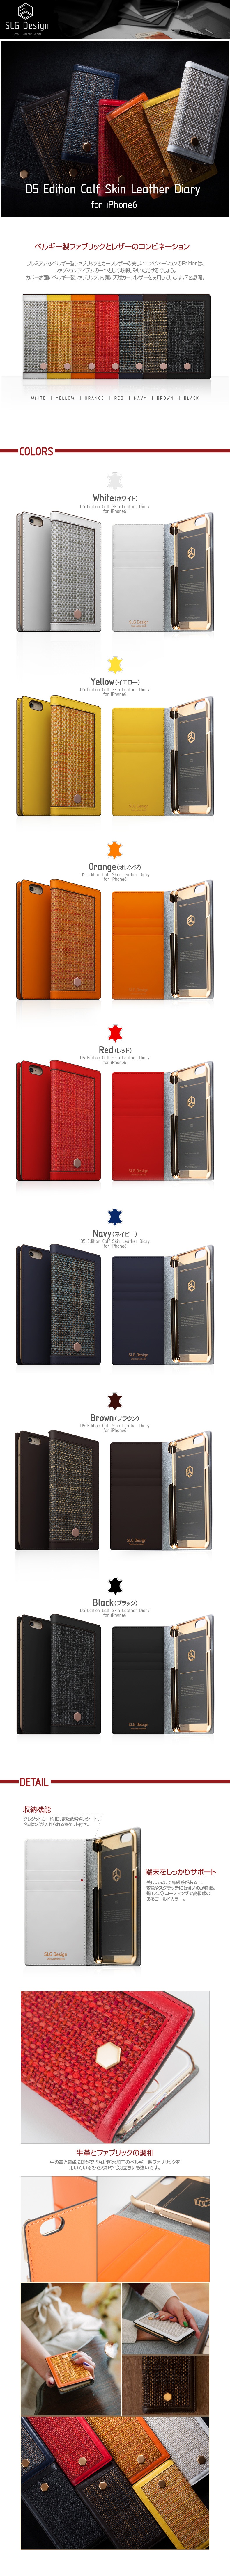 【iPhone6 ケース】 SLG Design D5 Edition Calf Skin Leather Diary